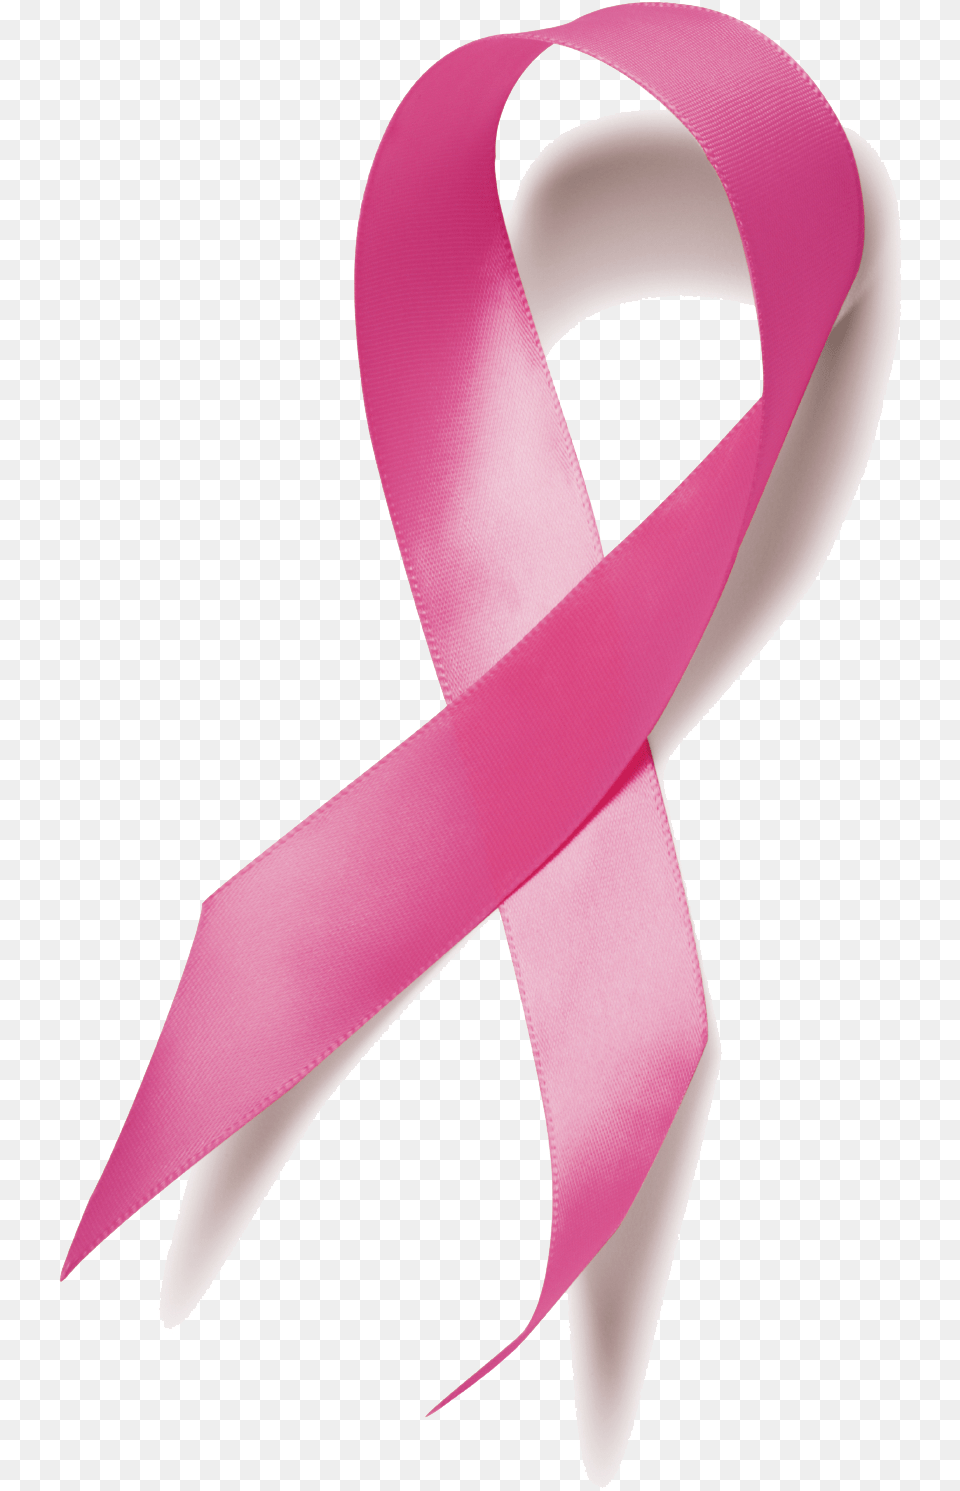 Breast Cancer Ribbon Image Breast Cancer Ribbon, Accessories, Formal Wear, Tie, Blade Free Png